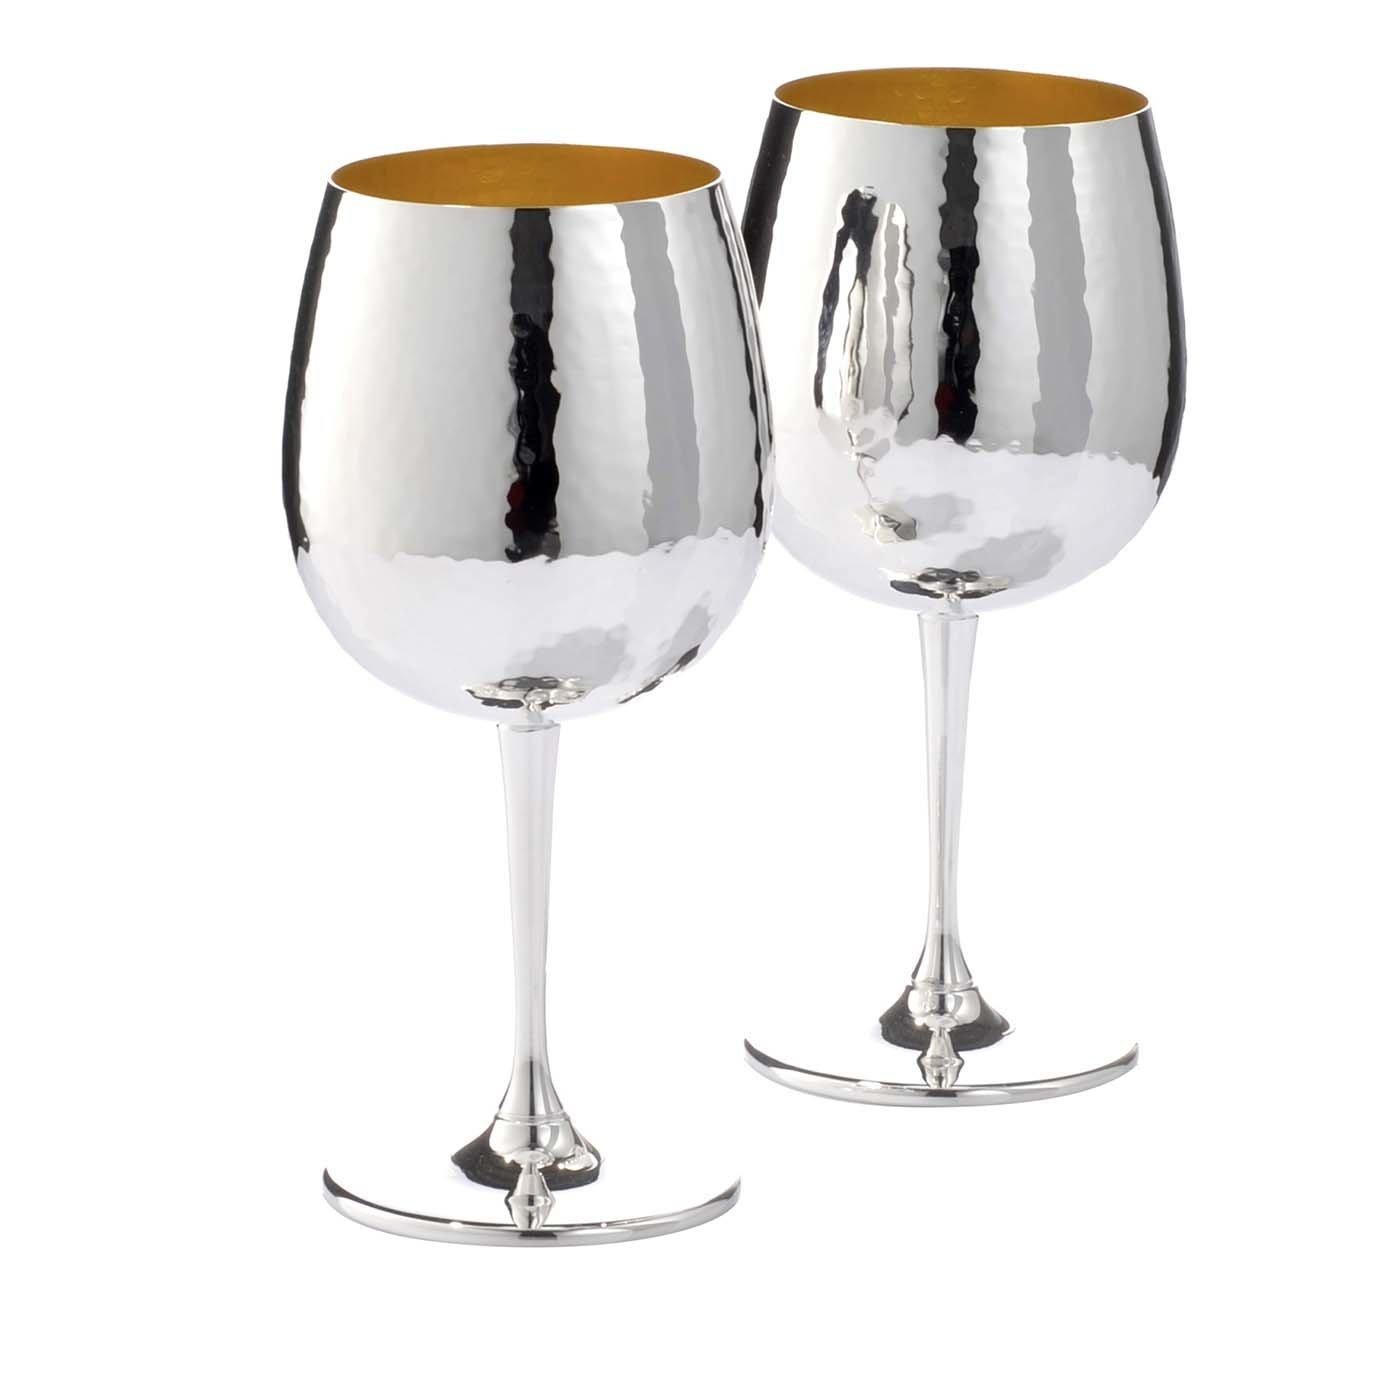 This sophisticated set of two wine glasses will elevate any dining table setting with the shimmering elegance of silver and a perfectly balanced silhouette. Designed for red wines, these silver-plated glasses with gold interior and boast a